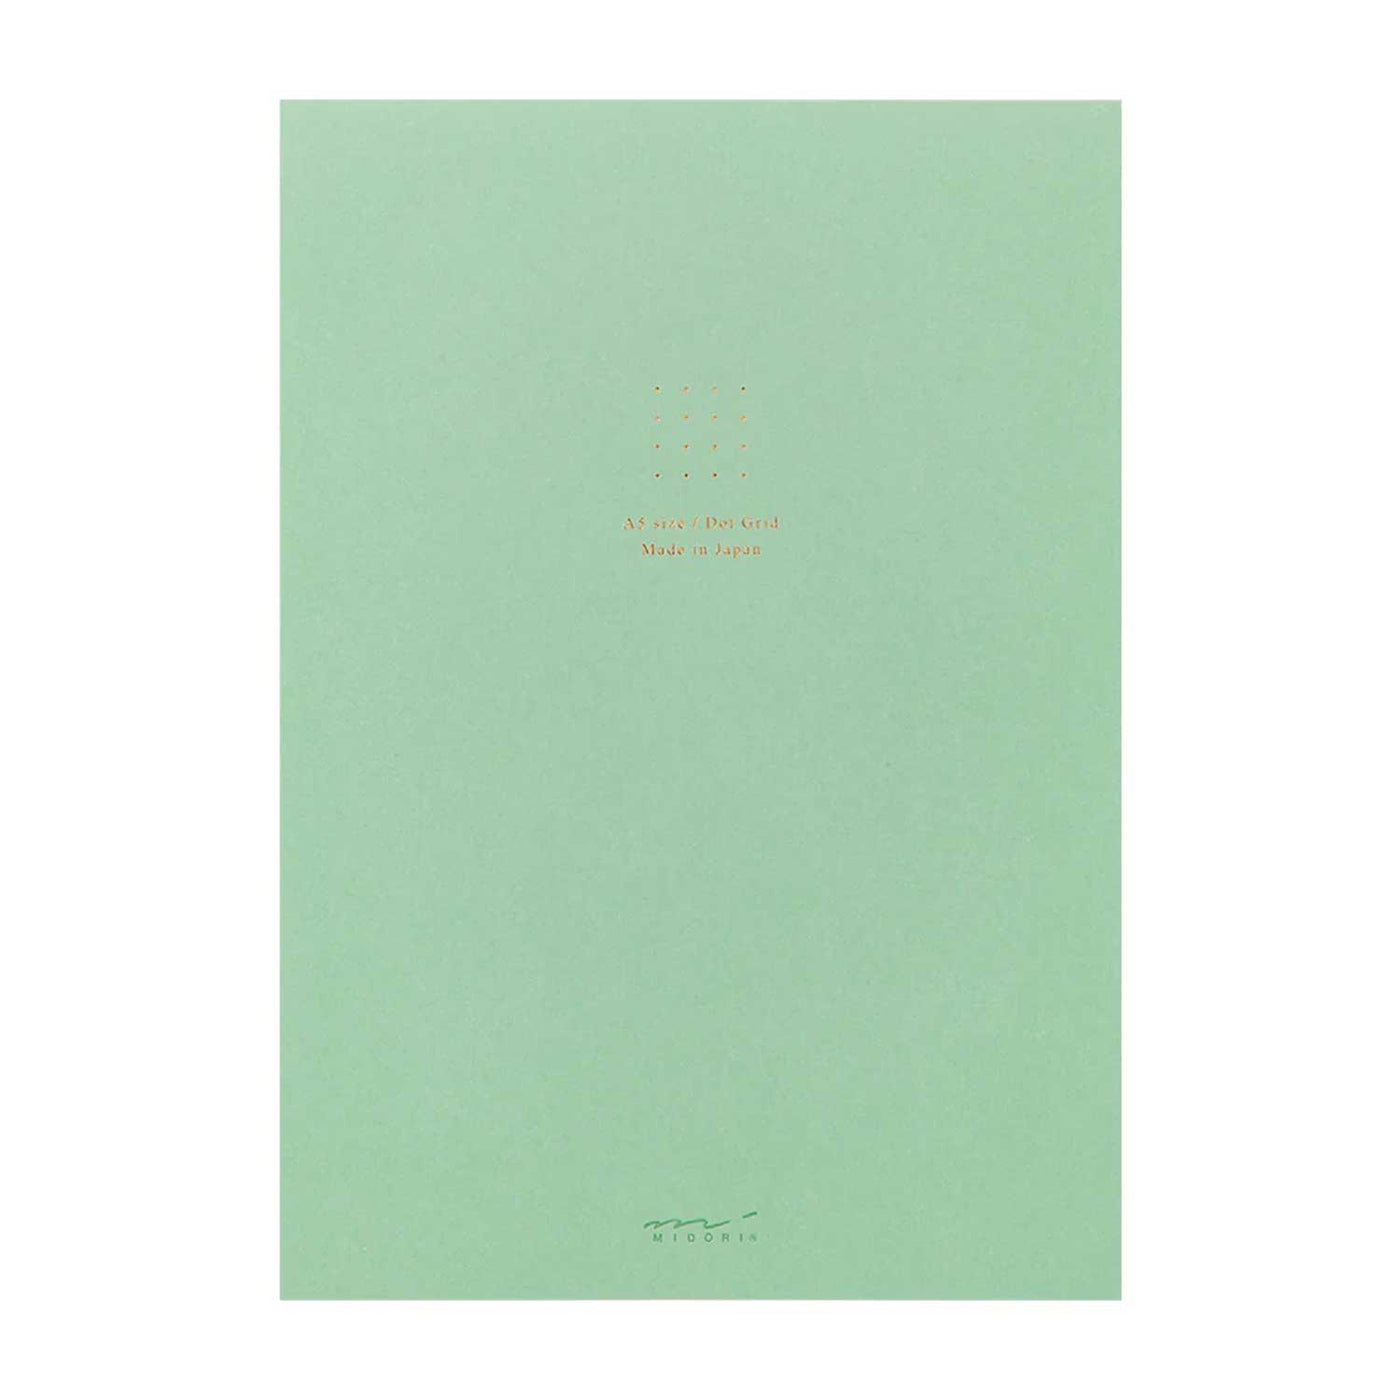 Midori Soft Colour Green Notepad - A5, Dotted 1